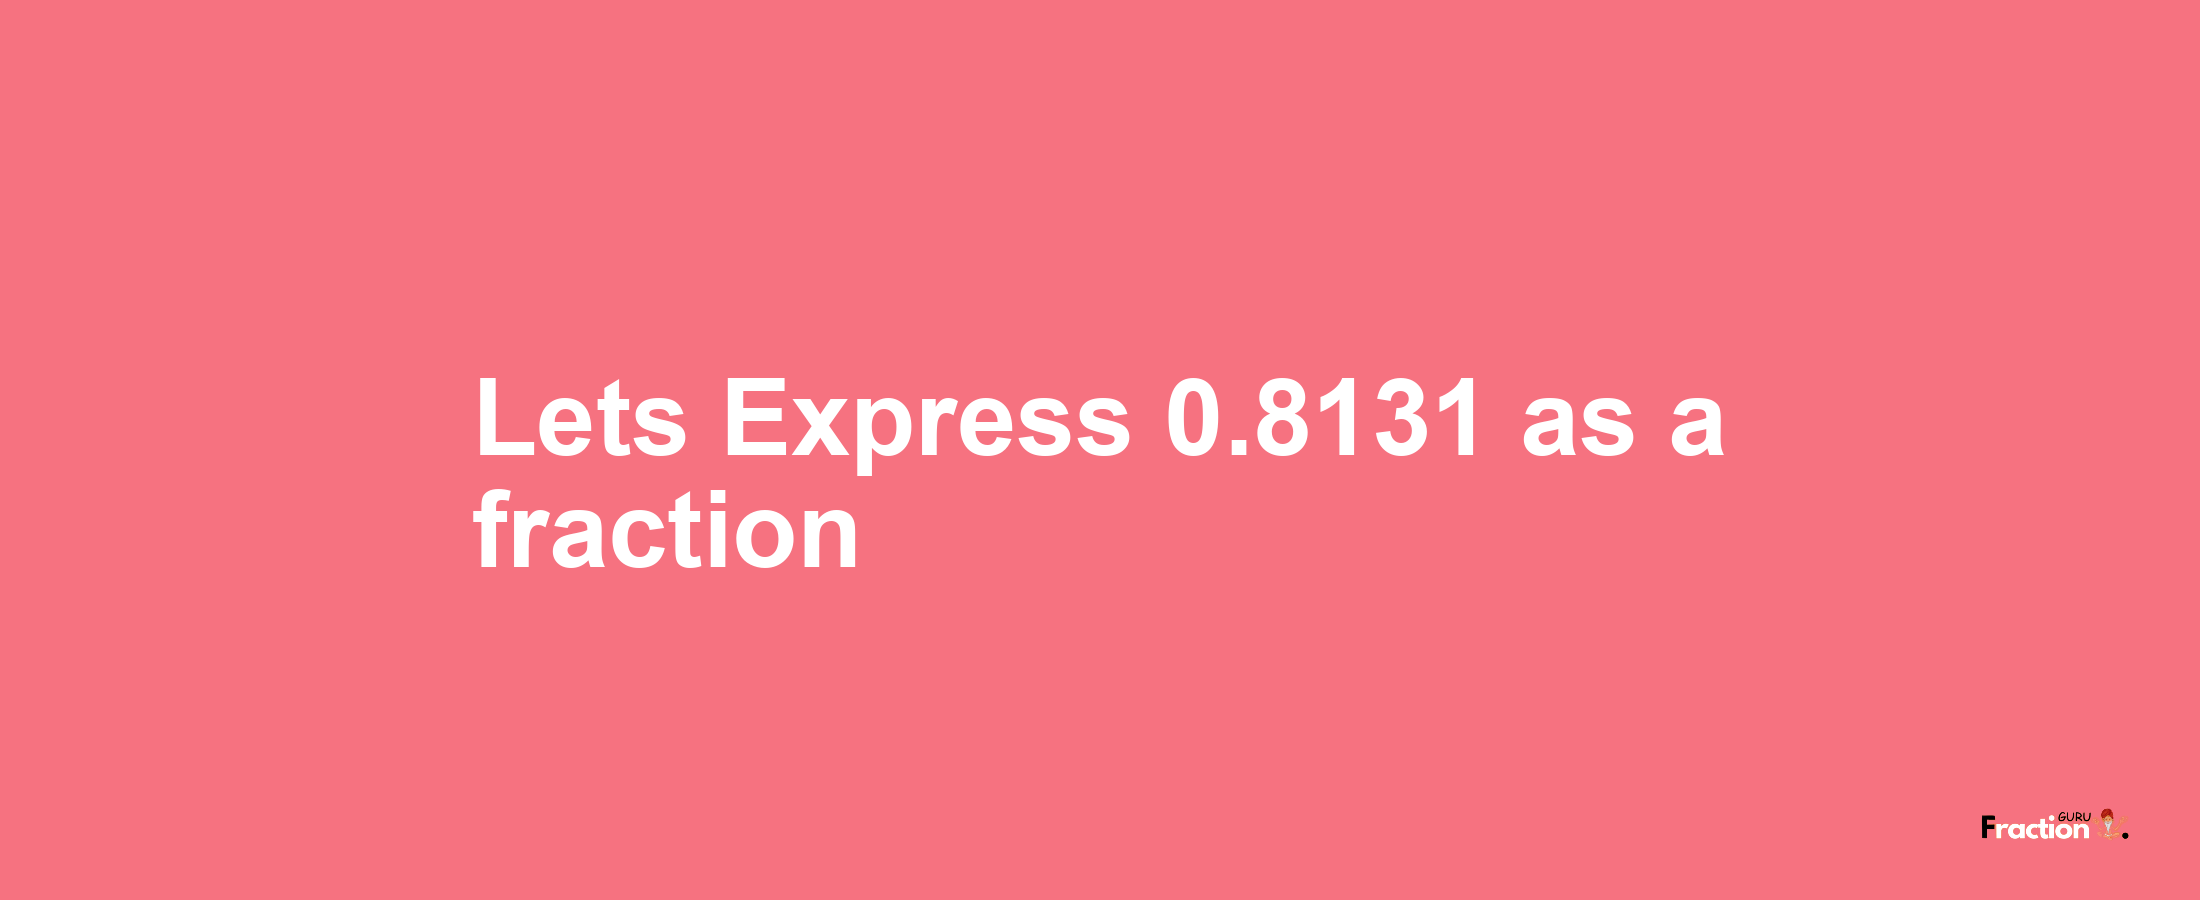 Lets Express 0.8131 as afraction